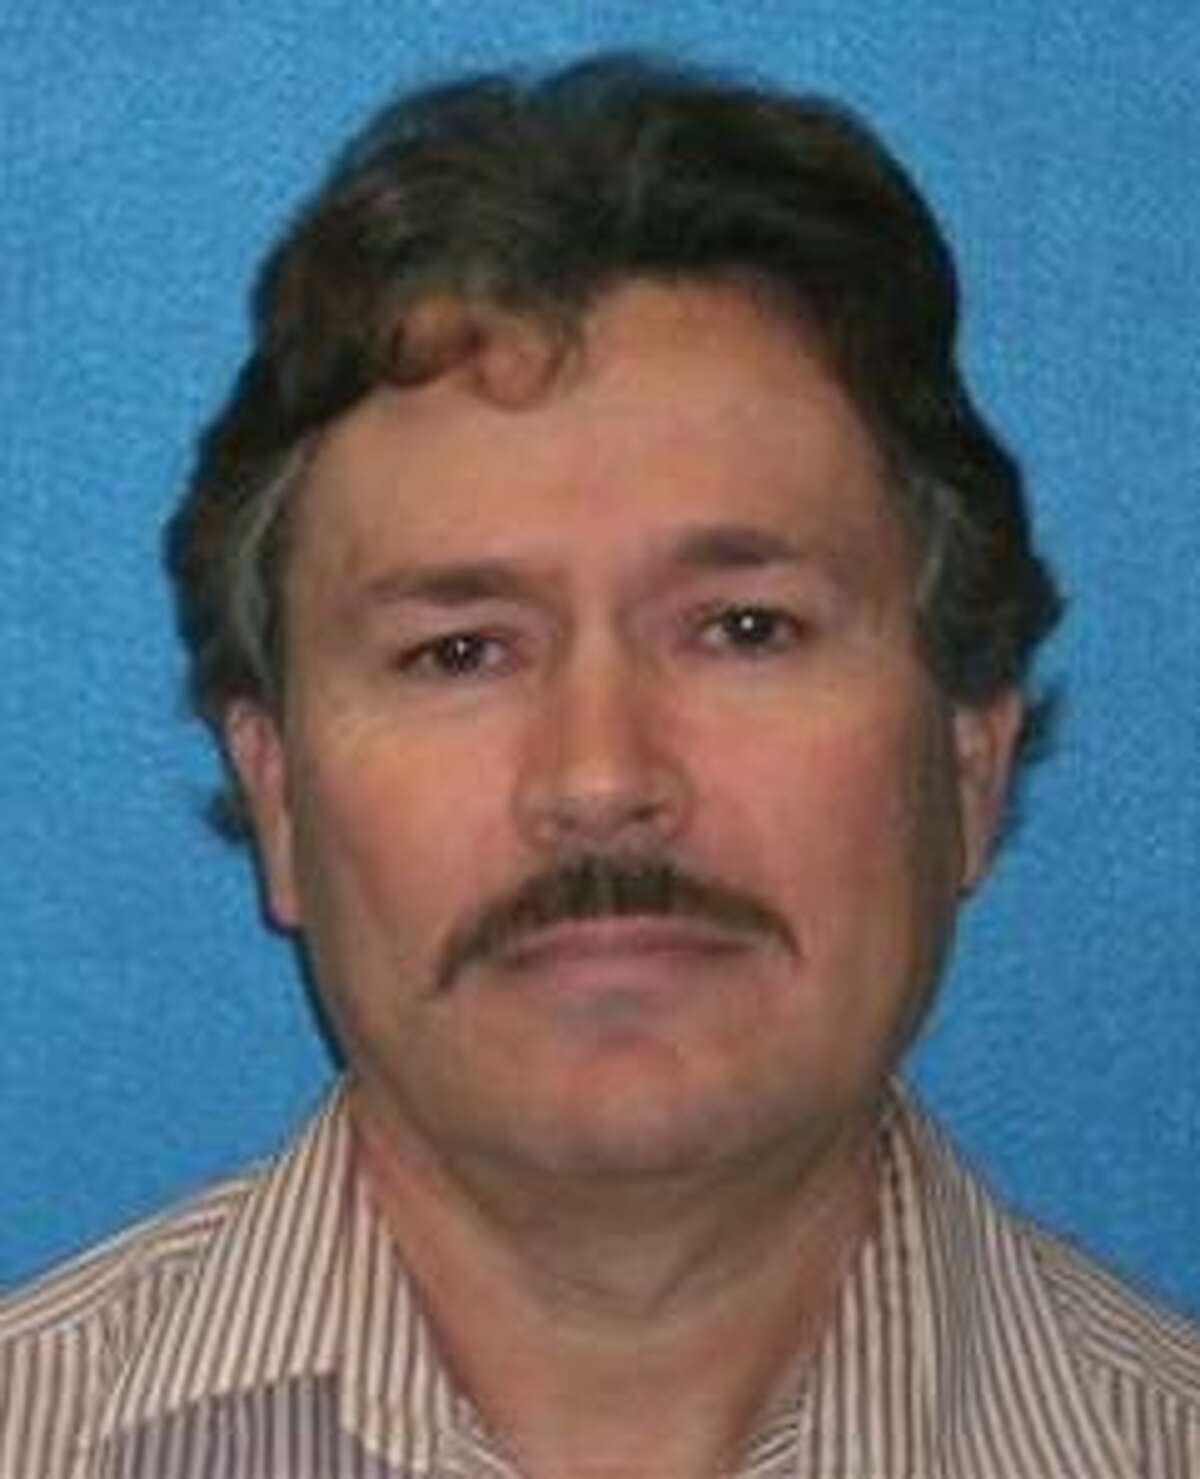 Texas Most Wanted Sex Offenders List Has New Member